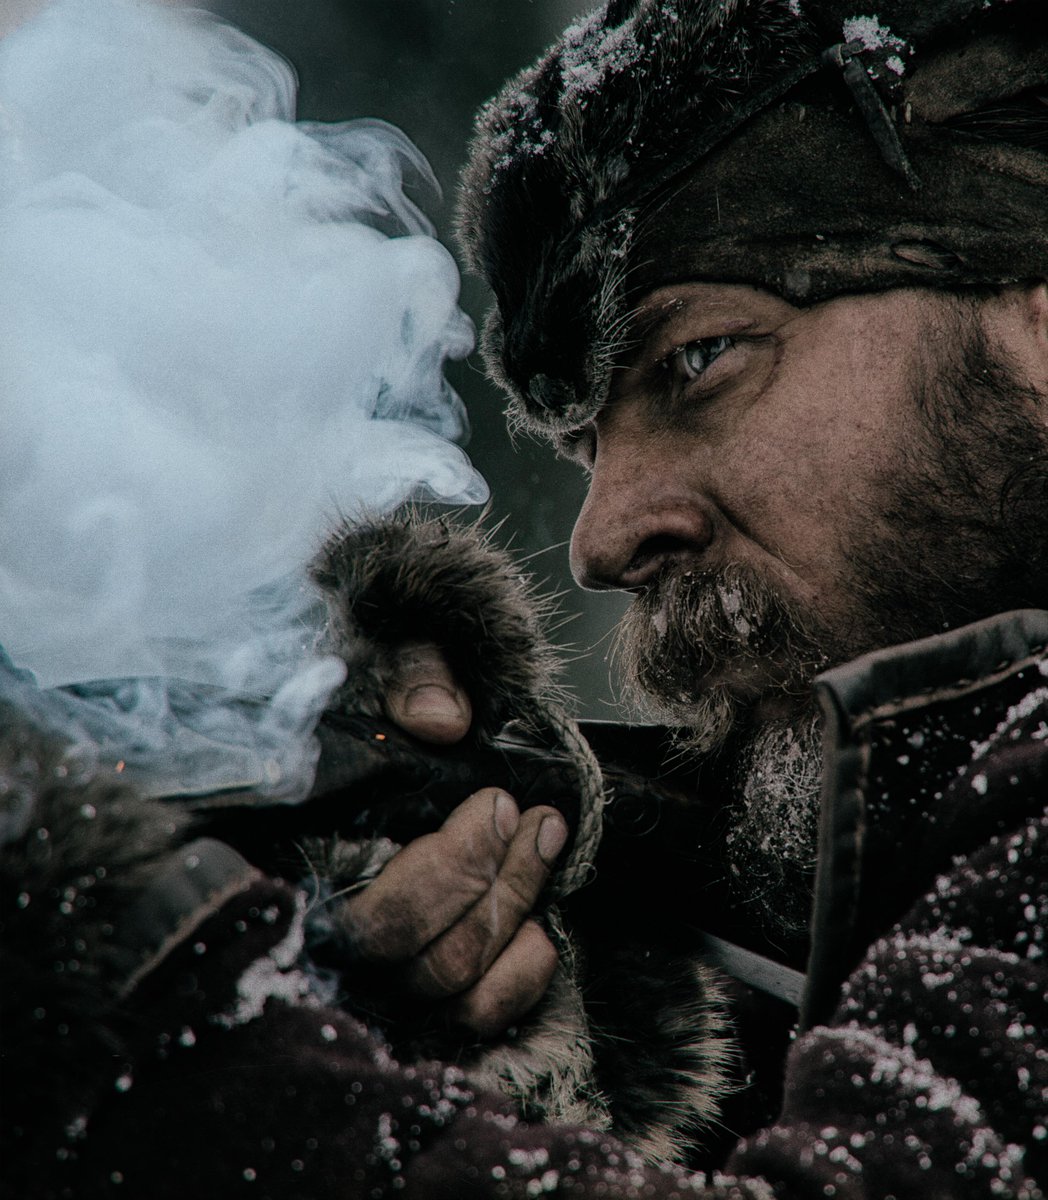 #TheRevenant. December 2015. http://t.co/fsCpXWNTS2 http://t.co/X9mGXH3yFM